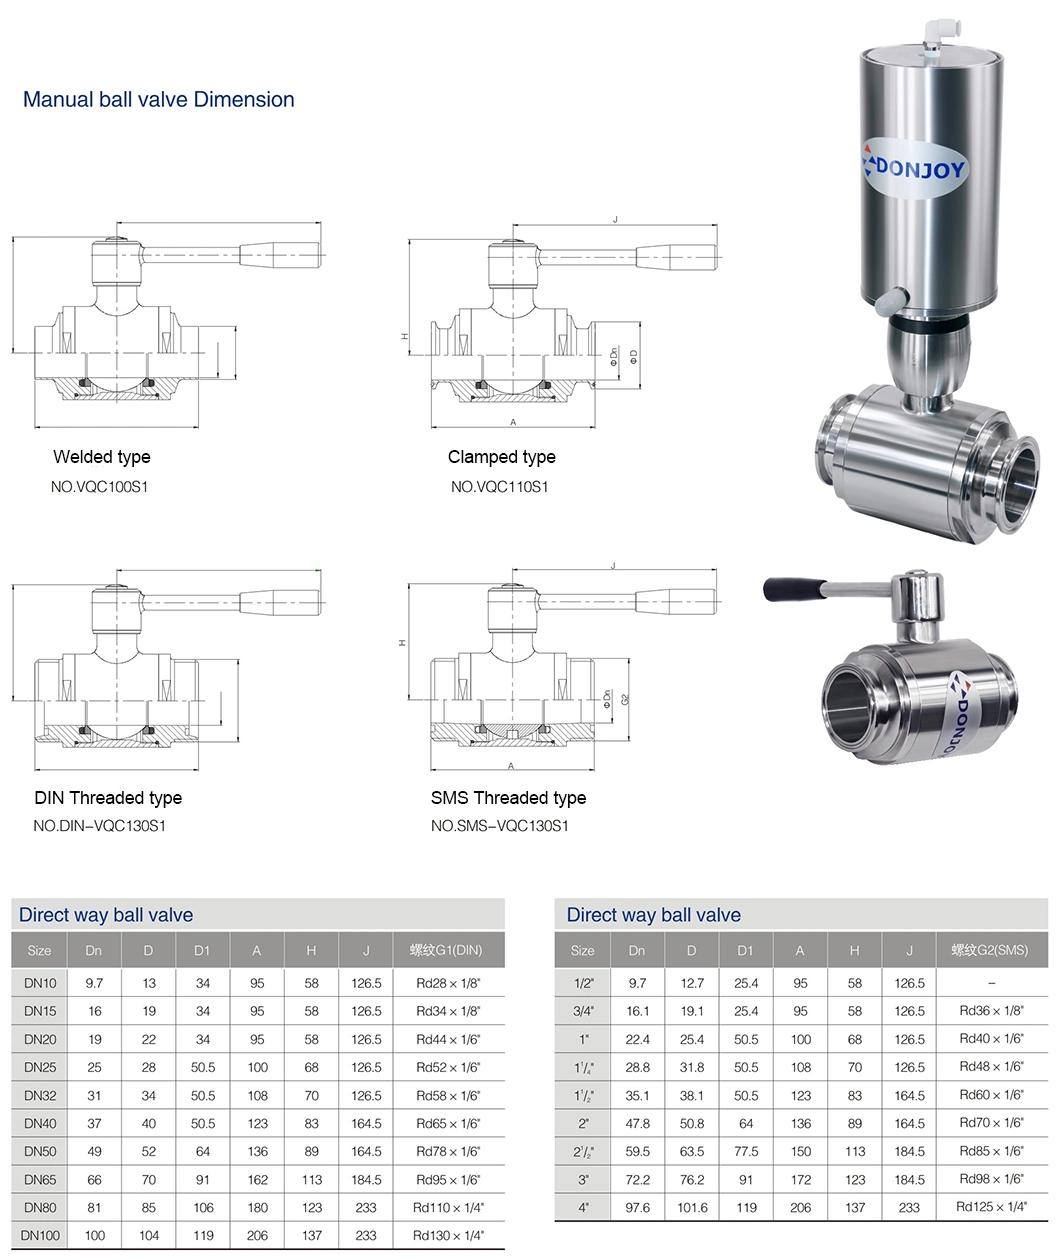 Us 3A Certification 3-PC Ball Valve with Electric Actuator